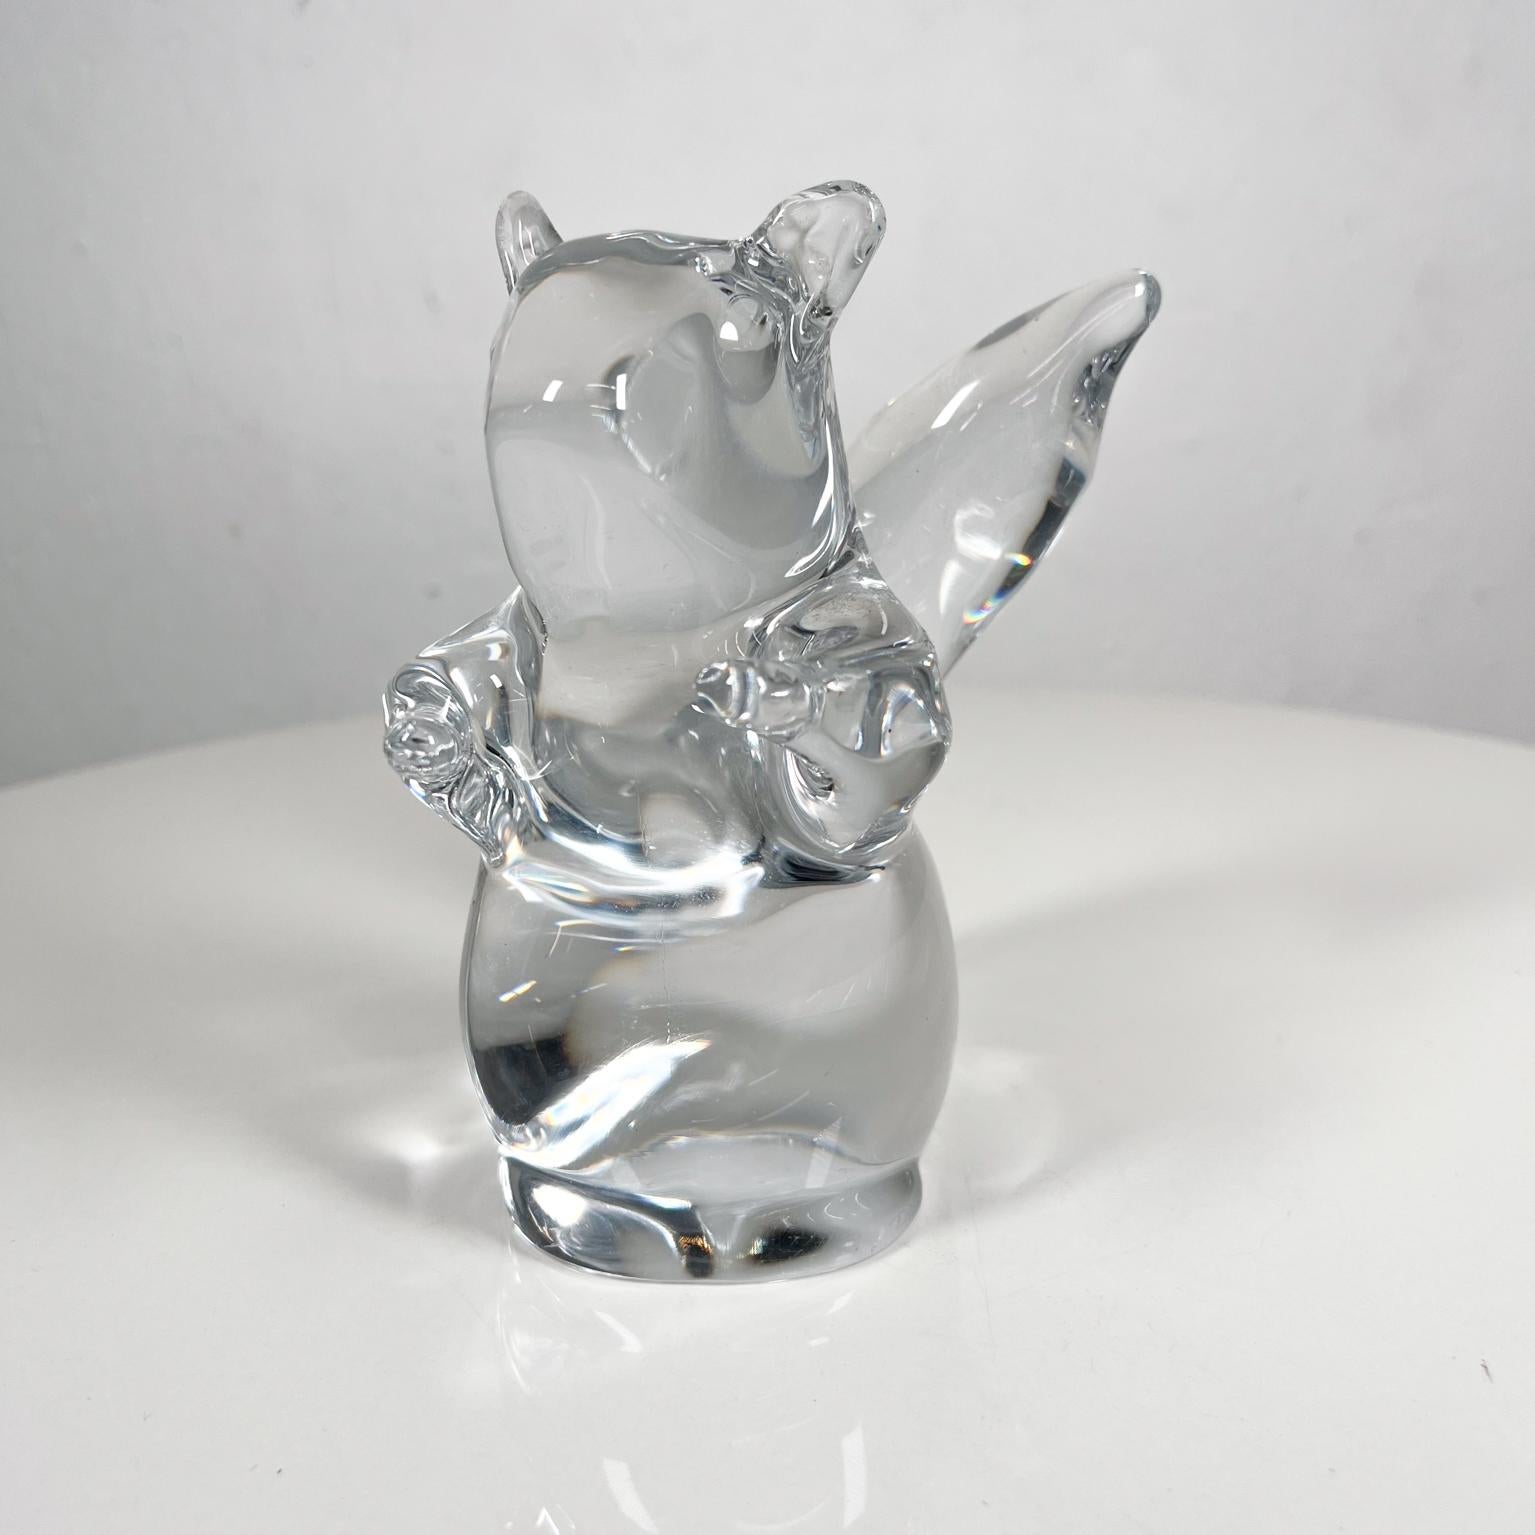 Daum France Lead Crystal Squirrel Figurine Sculpture
Signed by maker made in France.
4.5 d x 4 w x 6 h
Original vintage preowned condition
See images provided.